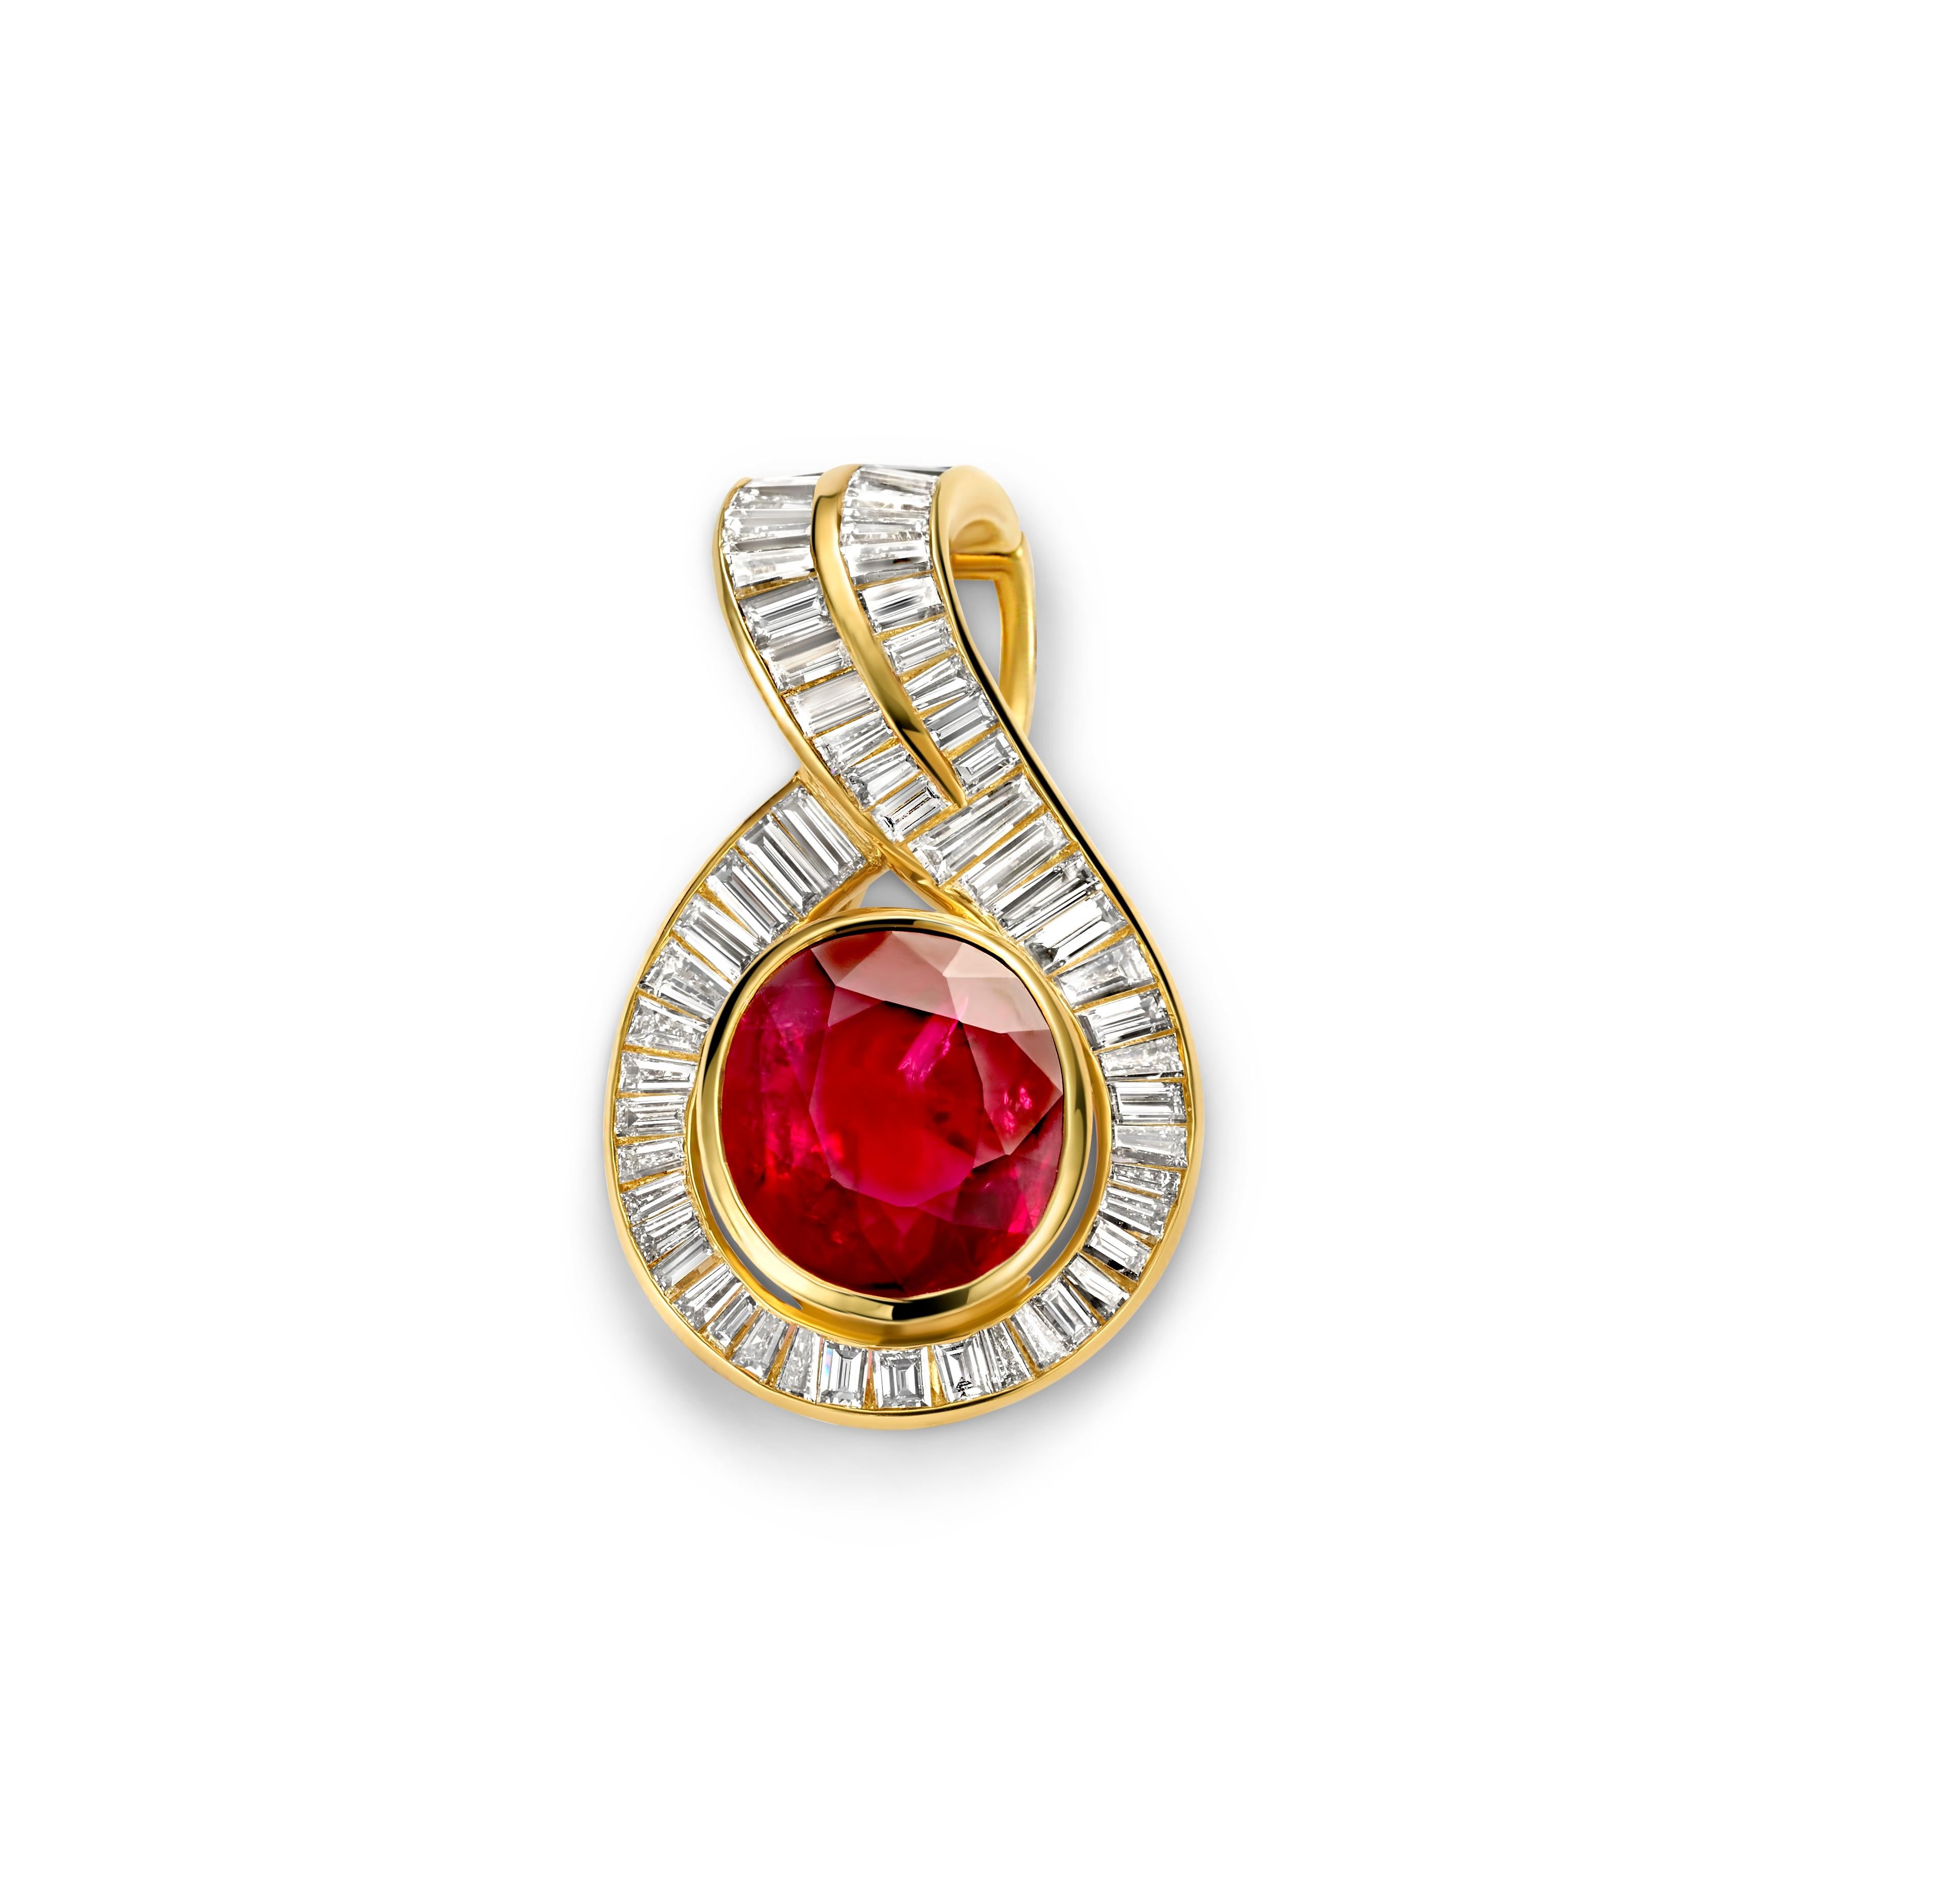 Gorgeous 18kt Yellow Gold pendant Set with GRS Certified 10 ct. Ruby and Diamonds , Estate His Majesty the Sultan of Oman Qaboos Bin Said

Ruby: Red Oval shape, Brilliant cut Siam Ruby 10 ct. GRS Certified GRS2022-117258

Diamonds: Baguette cut